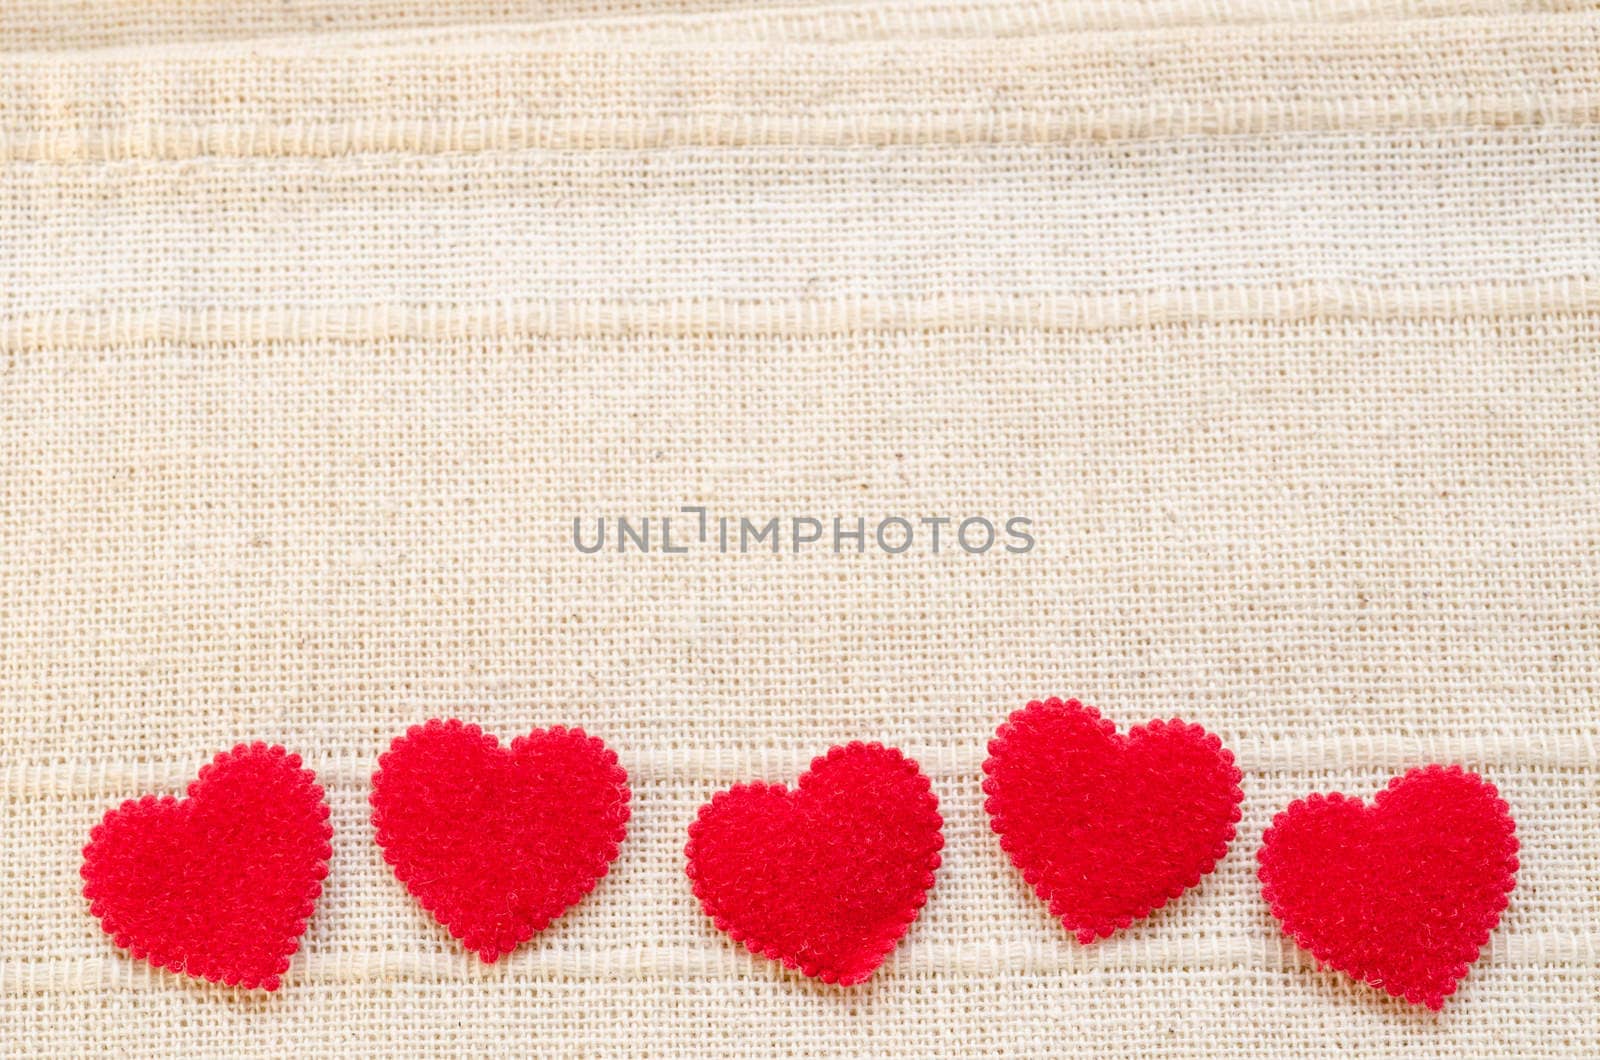 Red heart fabric on vintage fabric background with empty space. Love concept background.